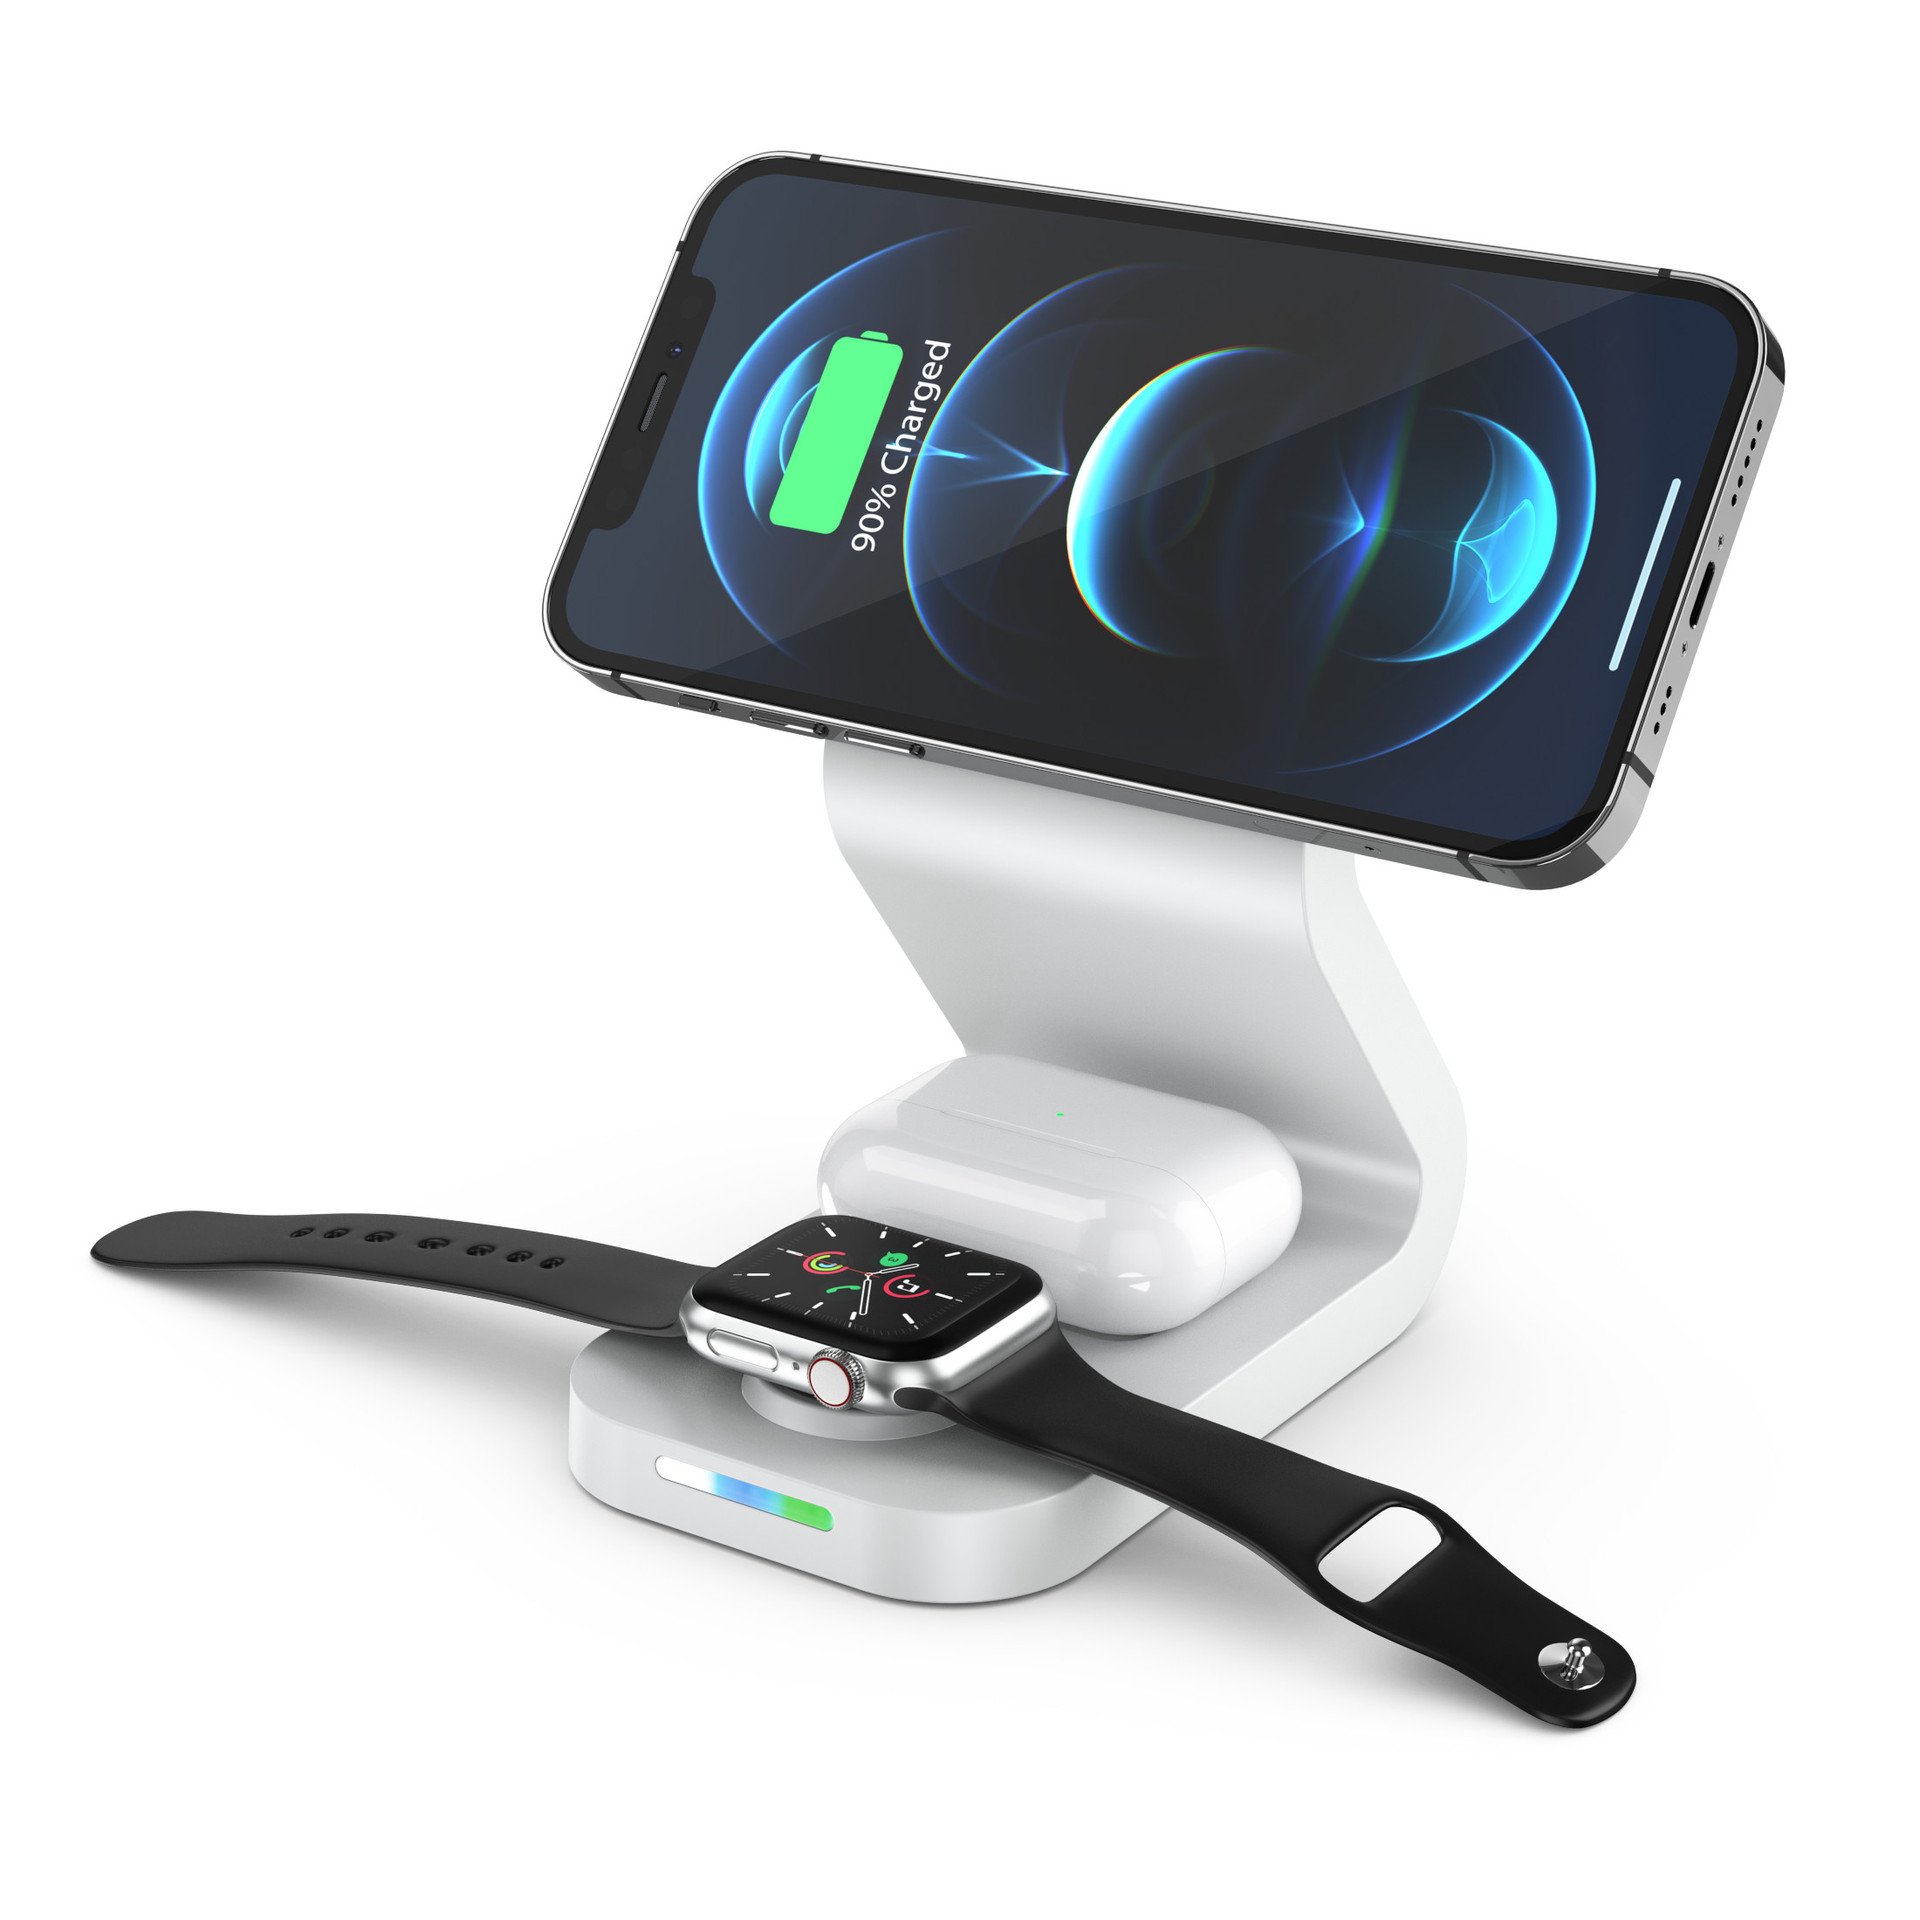 Wireless Charging Station for Apple - 3 in 1 Wireless Charger Dock Stand Watch and Phone Charger Station for Apple Watch